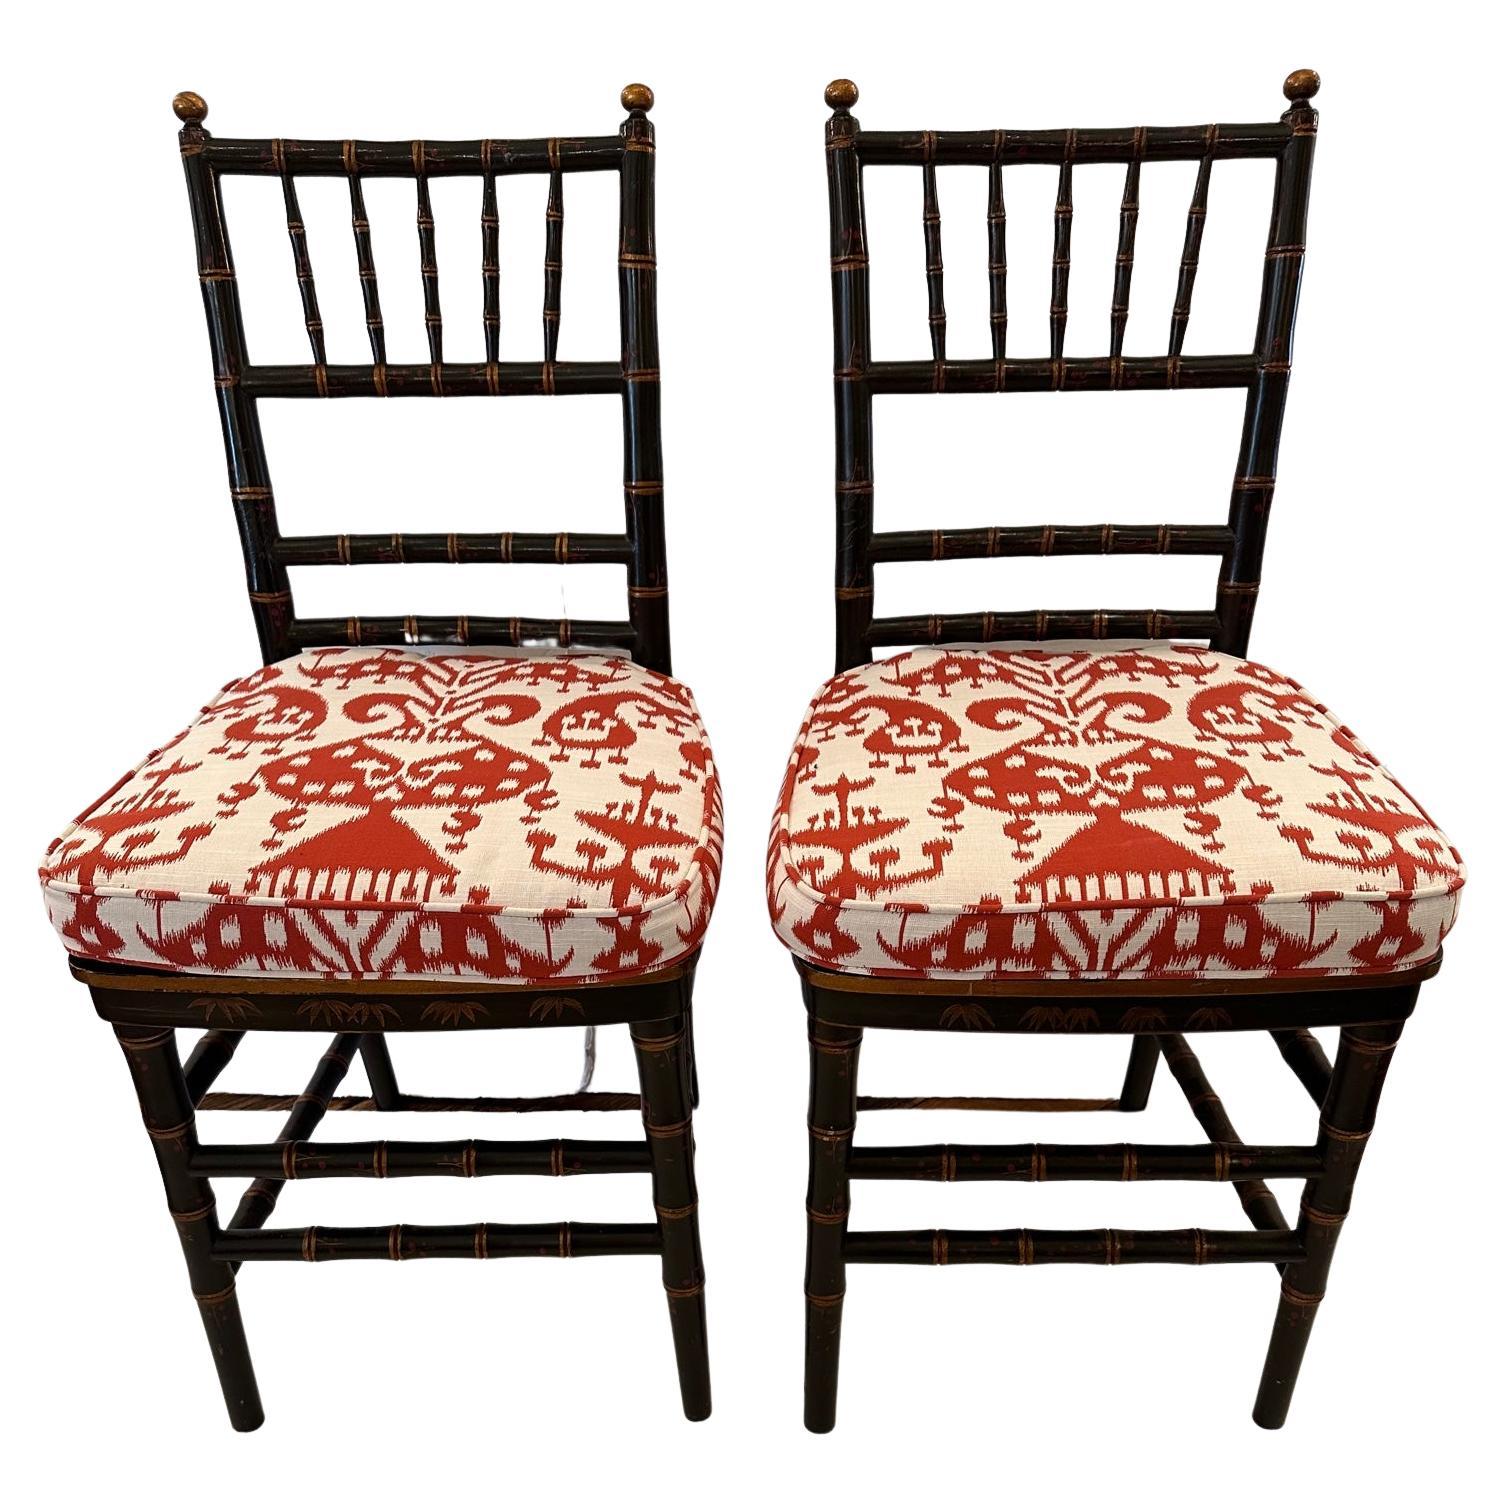 Lovely Pair of Black Faux Bamboo Hand Painted Side Chairs with New Cushions